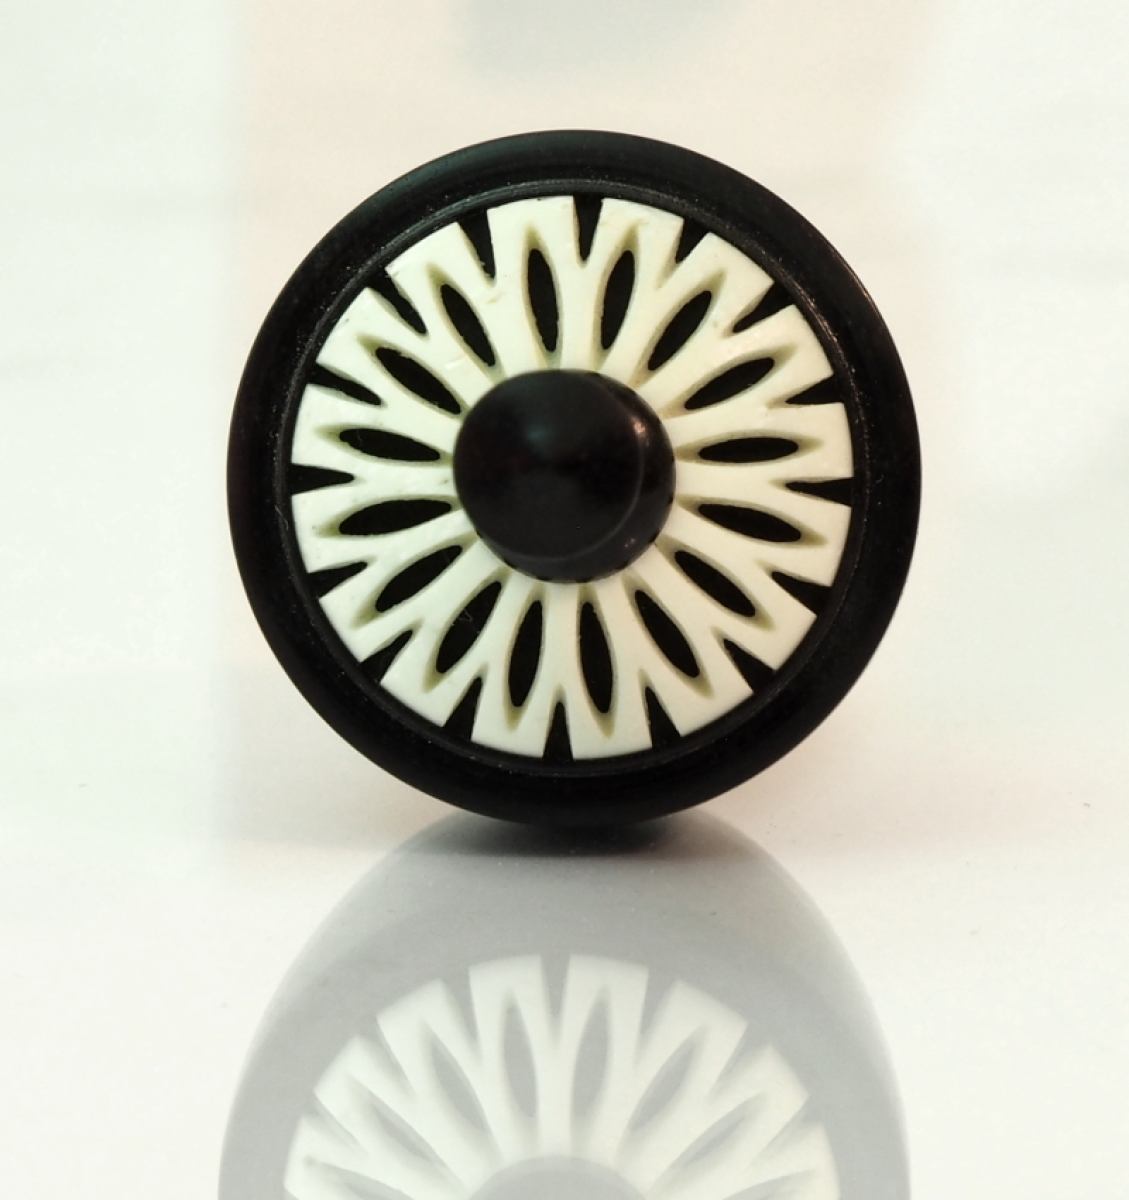 Elaborate Wooden Spinning Top made of Ebony with Carved Bone